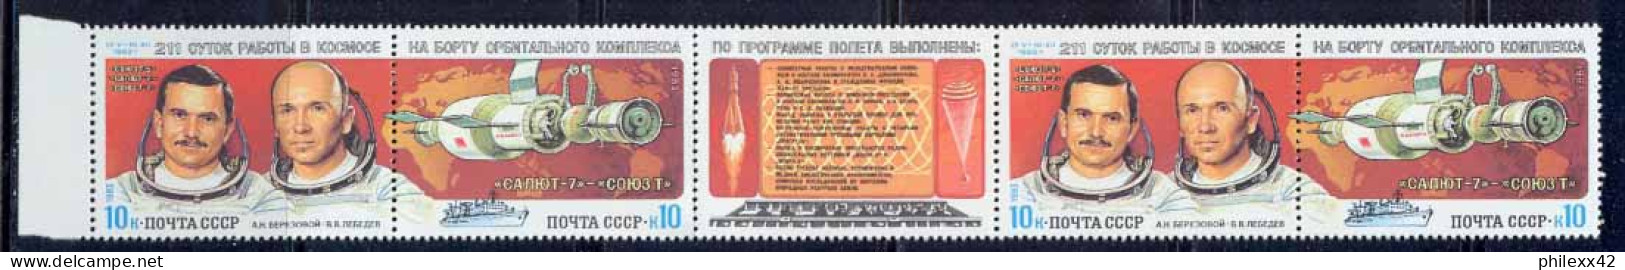 Russie (Russia Urss USSR) - 136 - N°4989 / 4990 Espace (space) CONQUETE SPACIALE BANDE ENTIERE - Russie & URSS